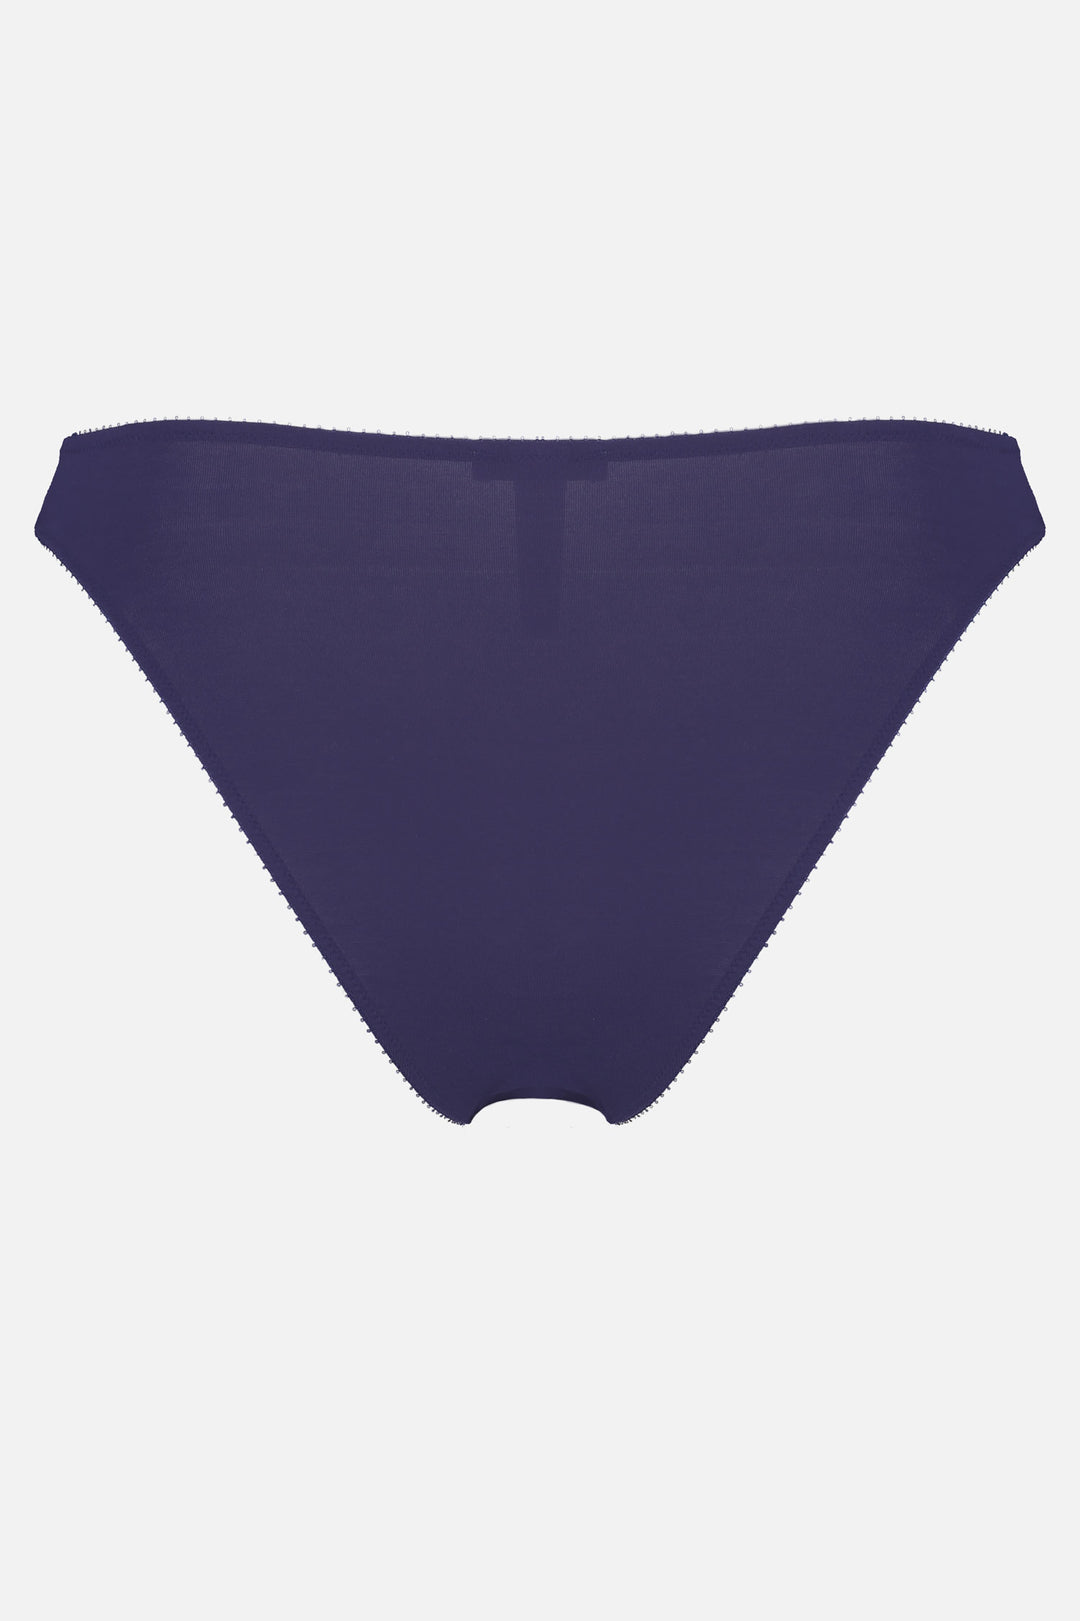 Videris Lingerie bikini knicker in navy TENCEL™  mid-rise style with cheeky bottom coverage and soft elastics